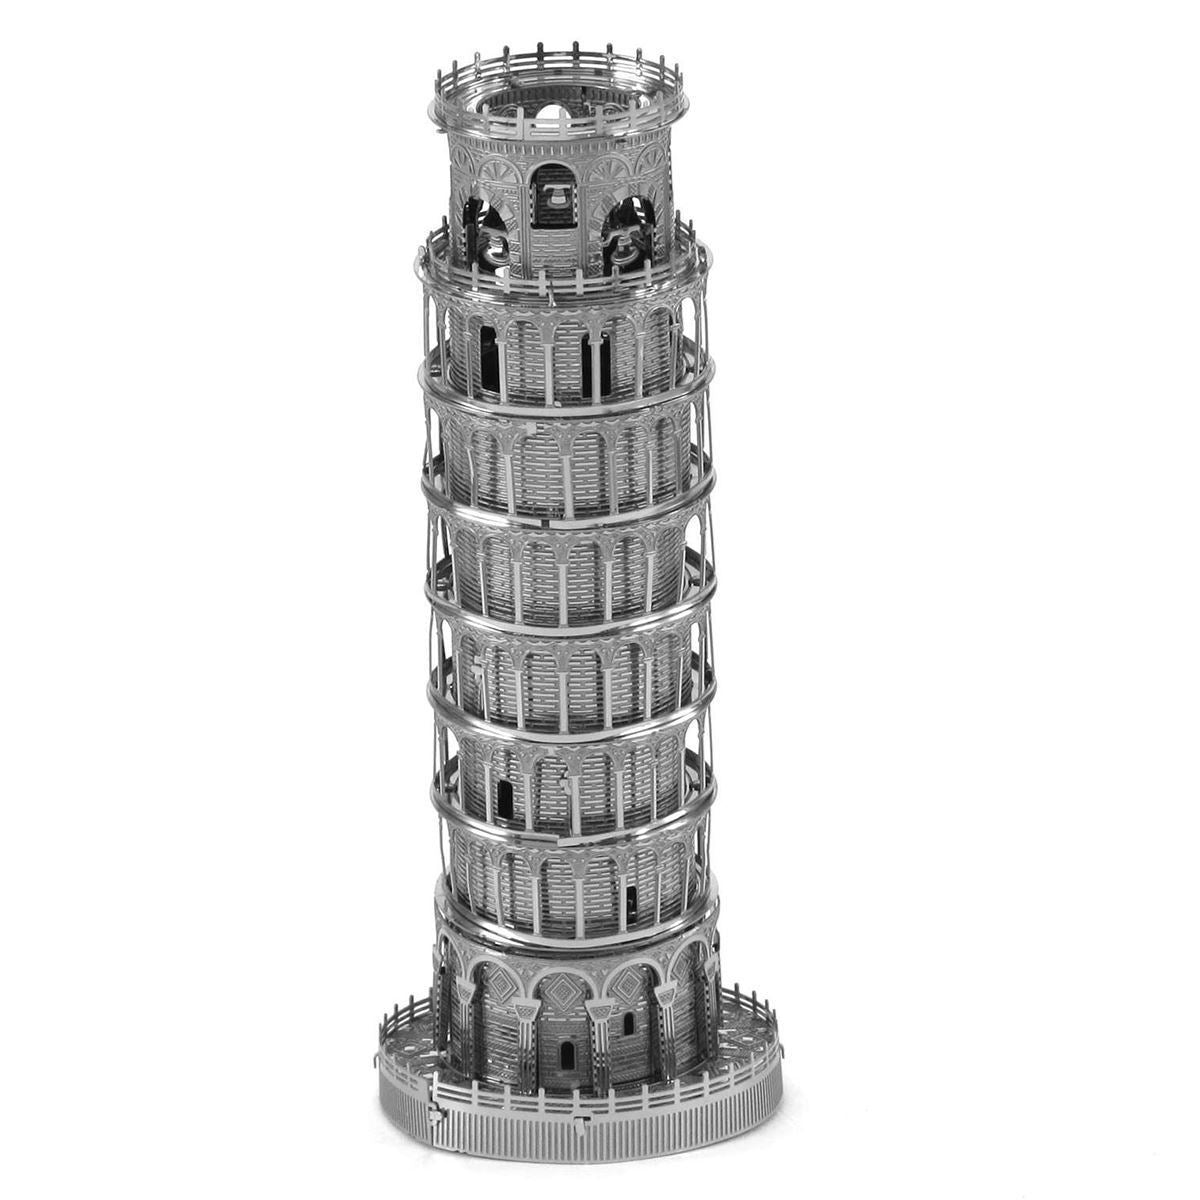 LEANING TOWER OF PISA 5194-ZD6